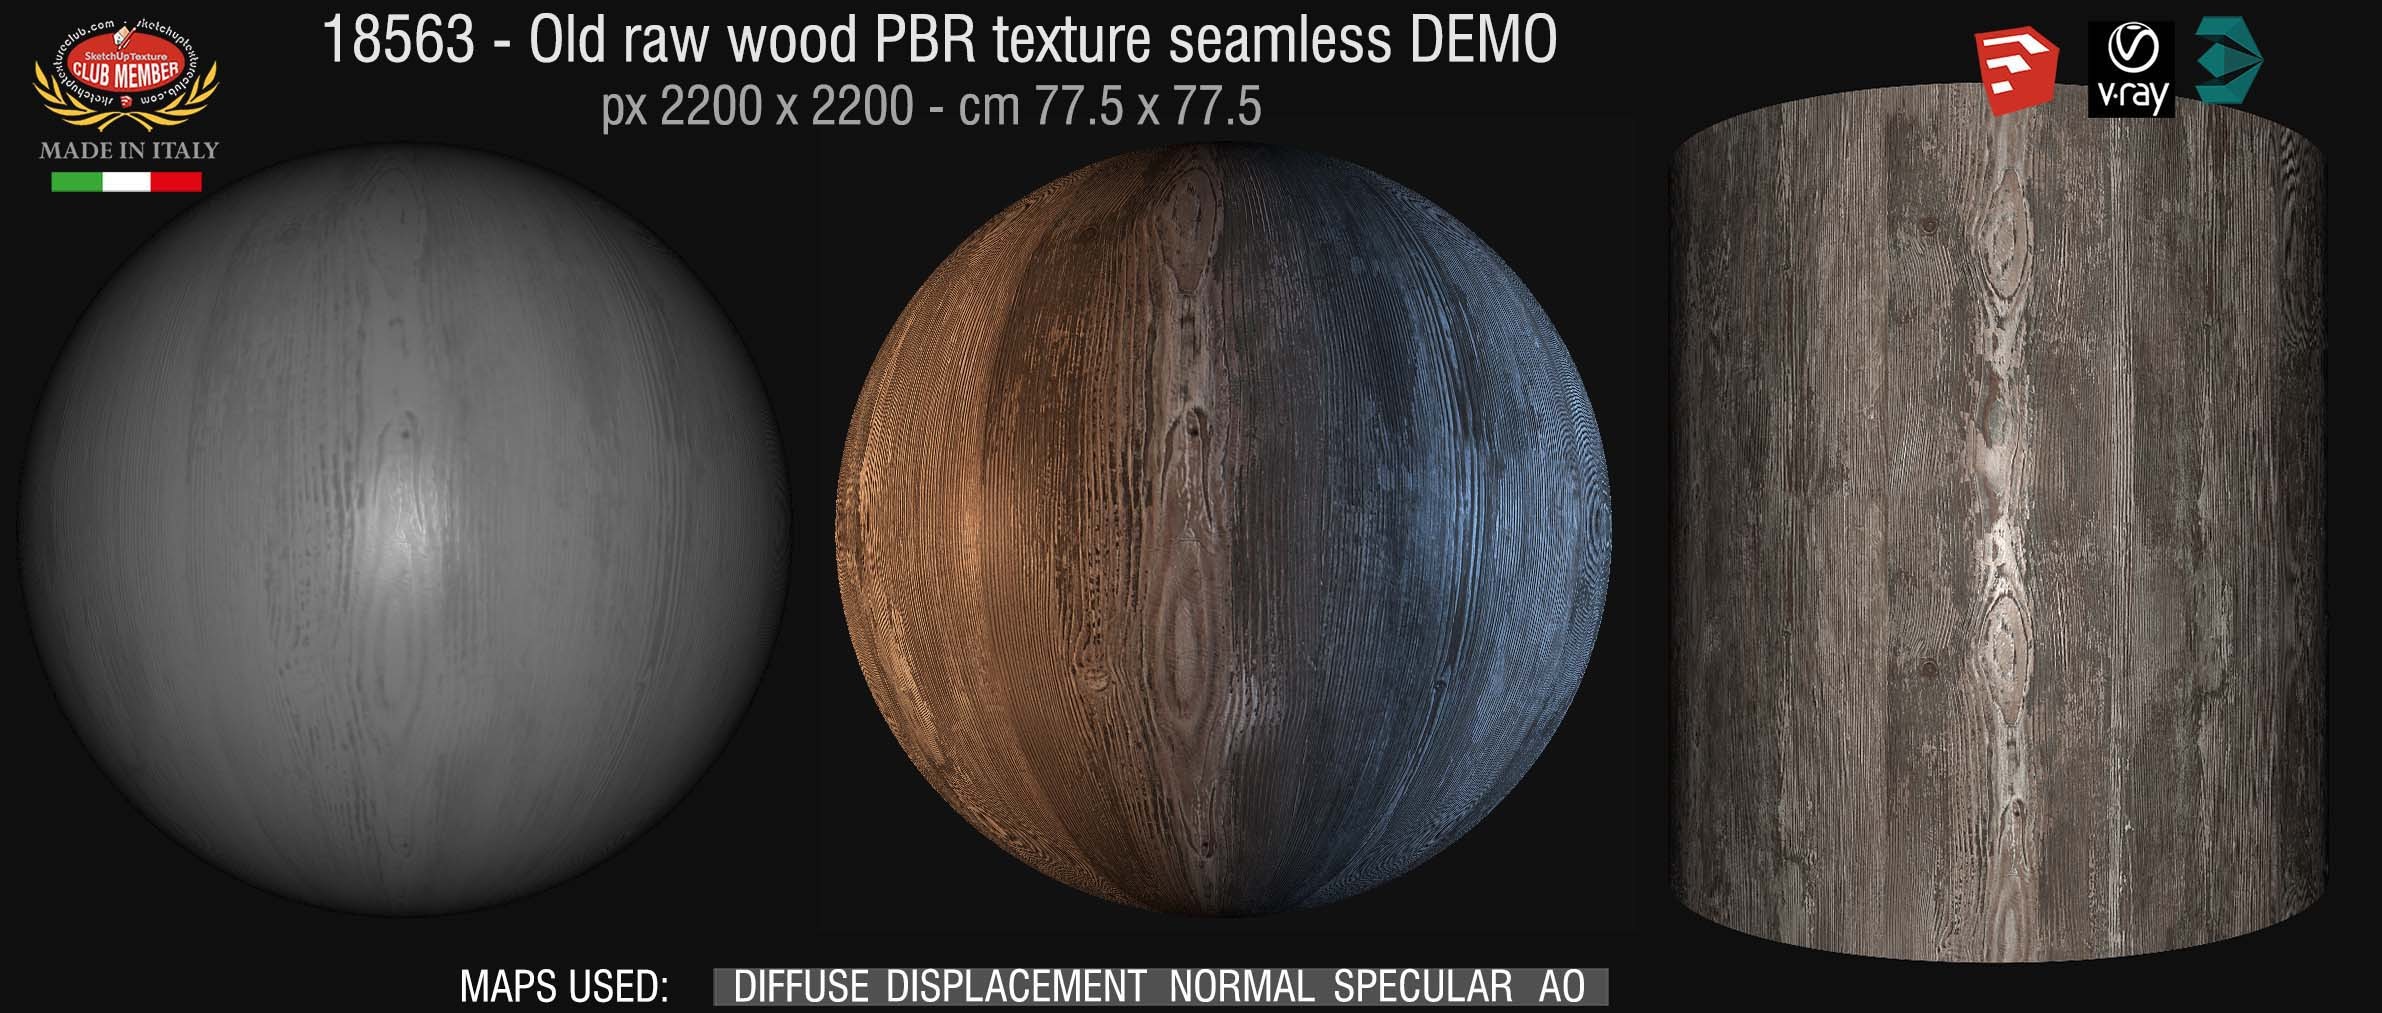 18563 Old raw wood PBR texture seamless DEMO